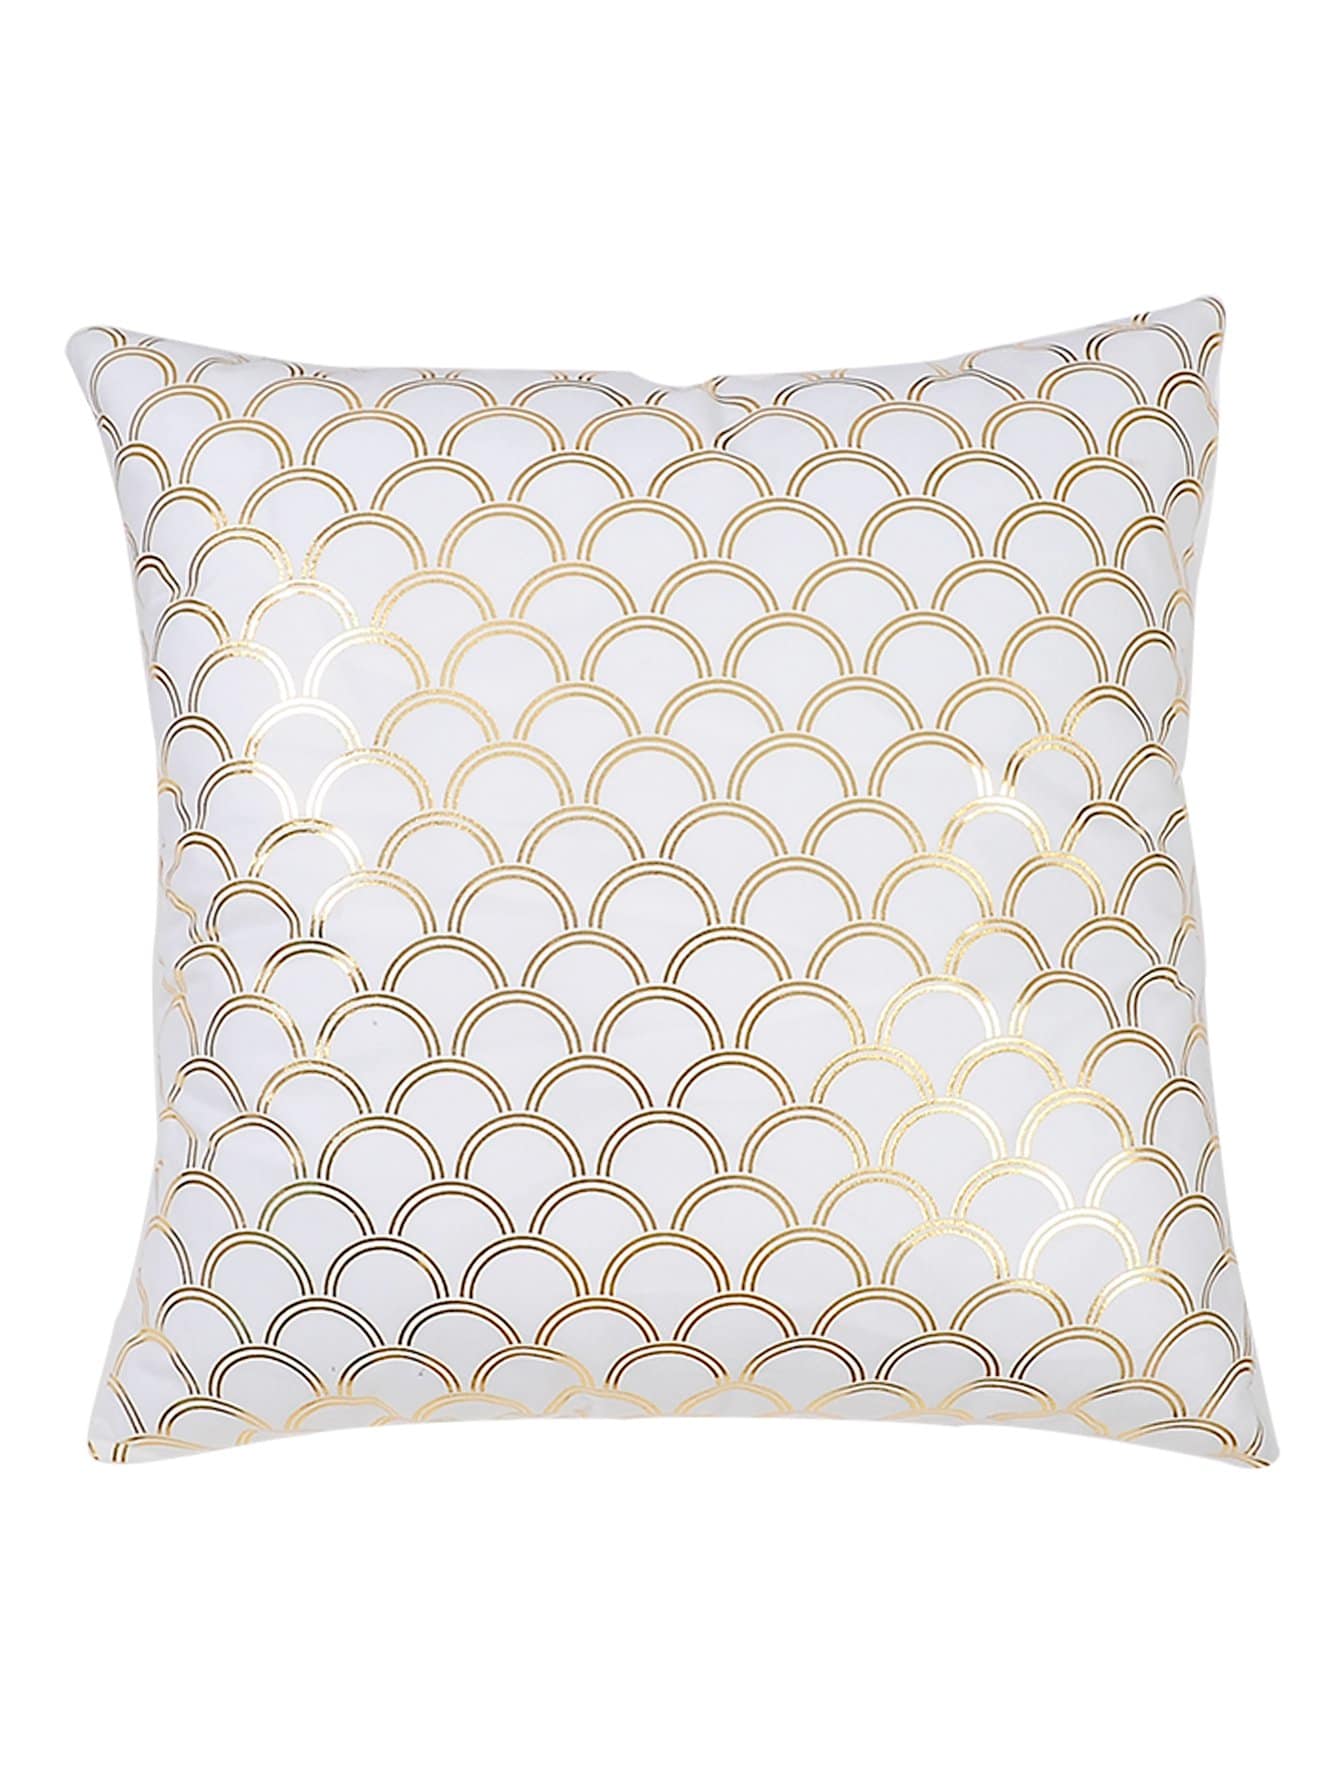 Scales Pattern Cushion Cover